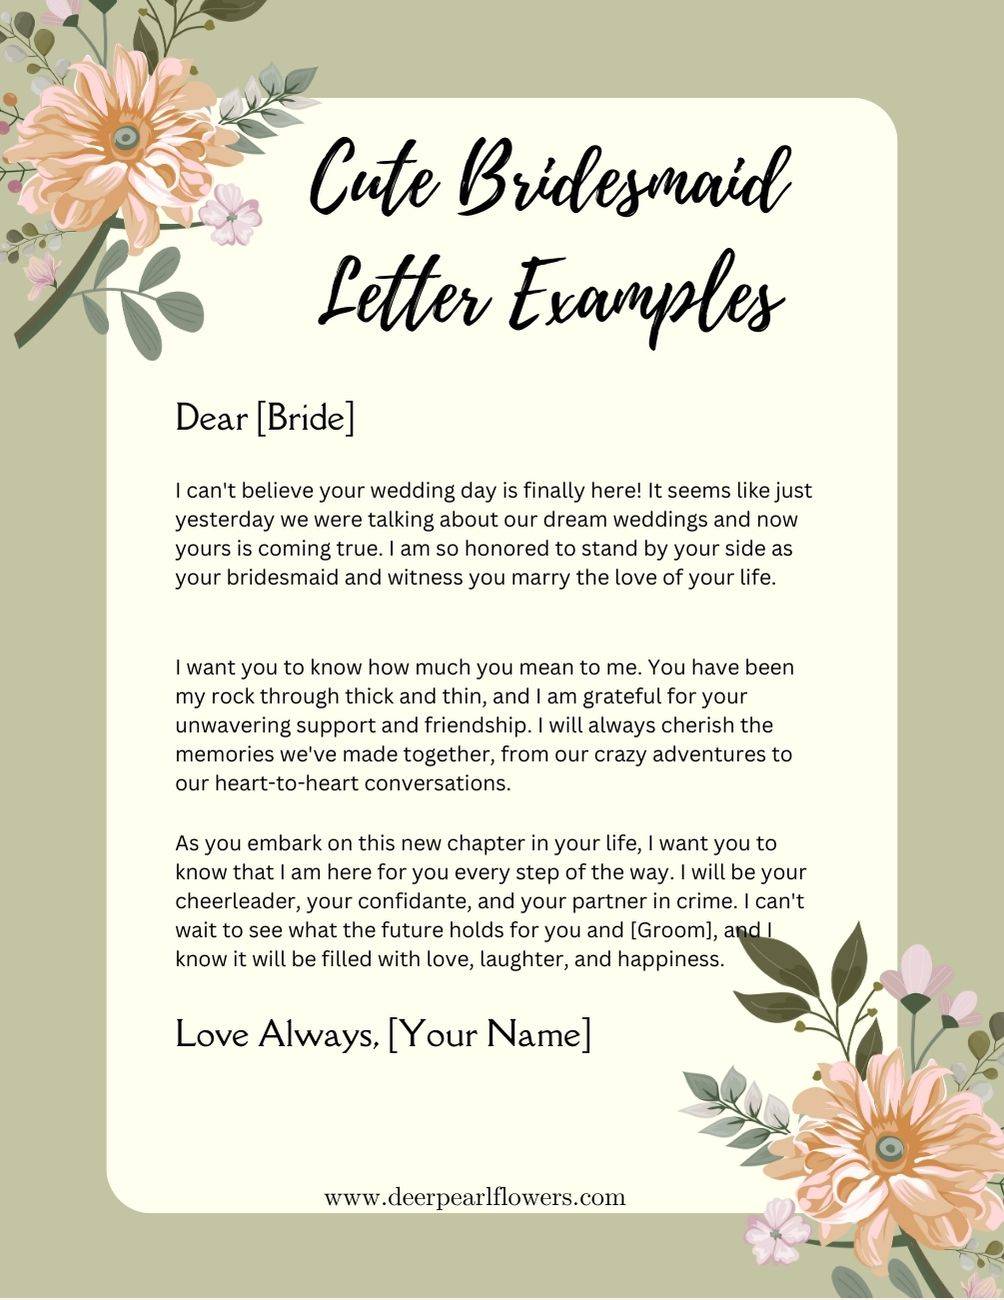 Cute Letter to Bride from Bridesmaid Letter Examples